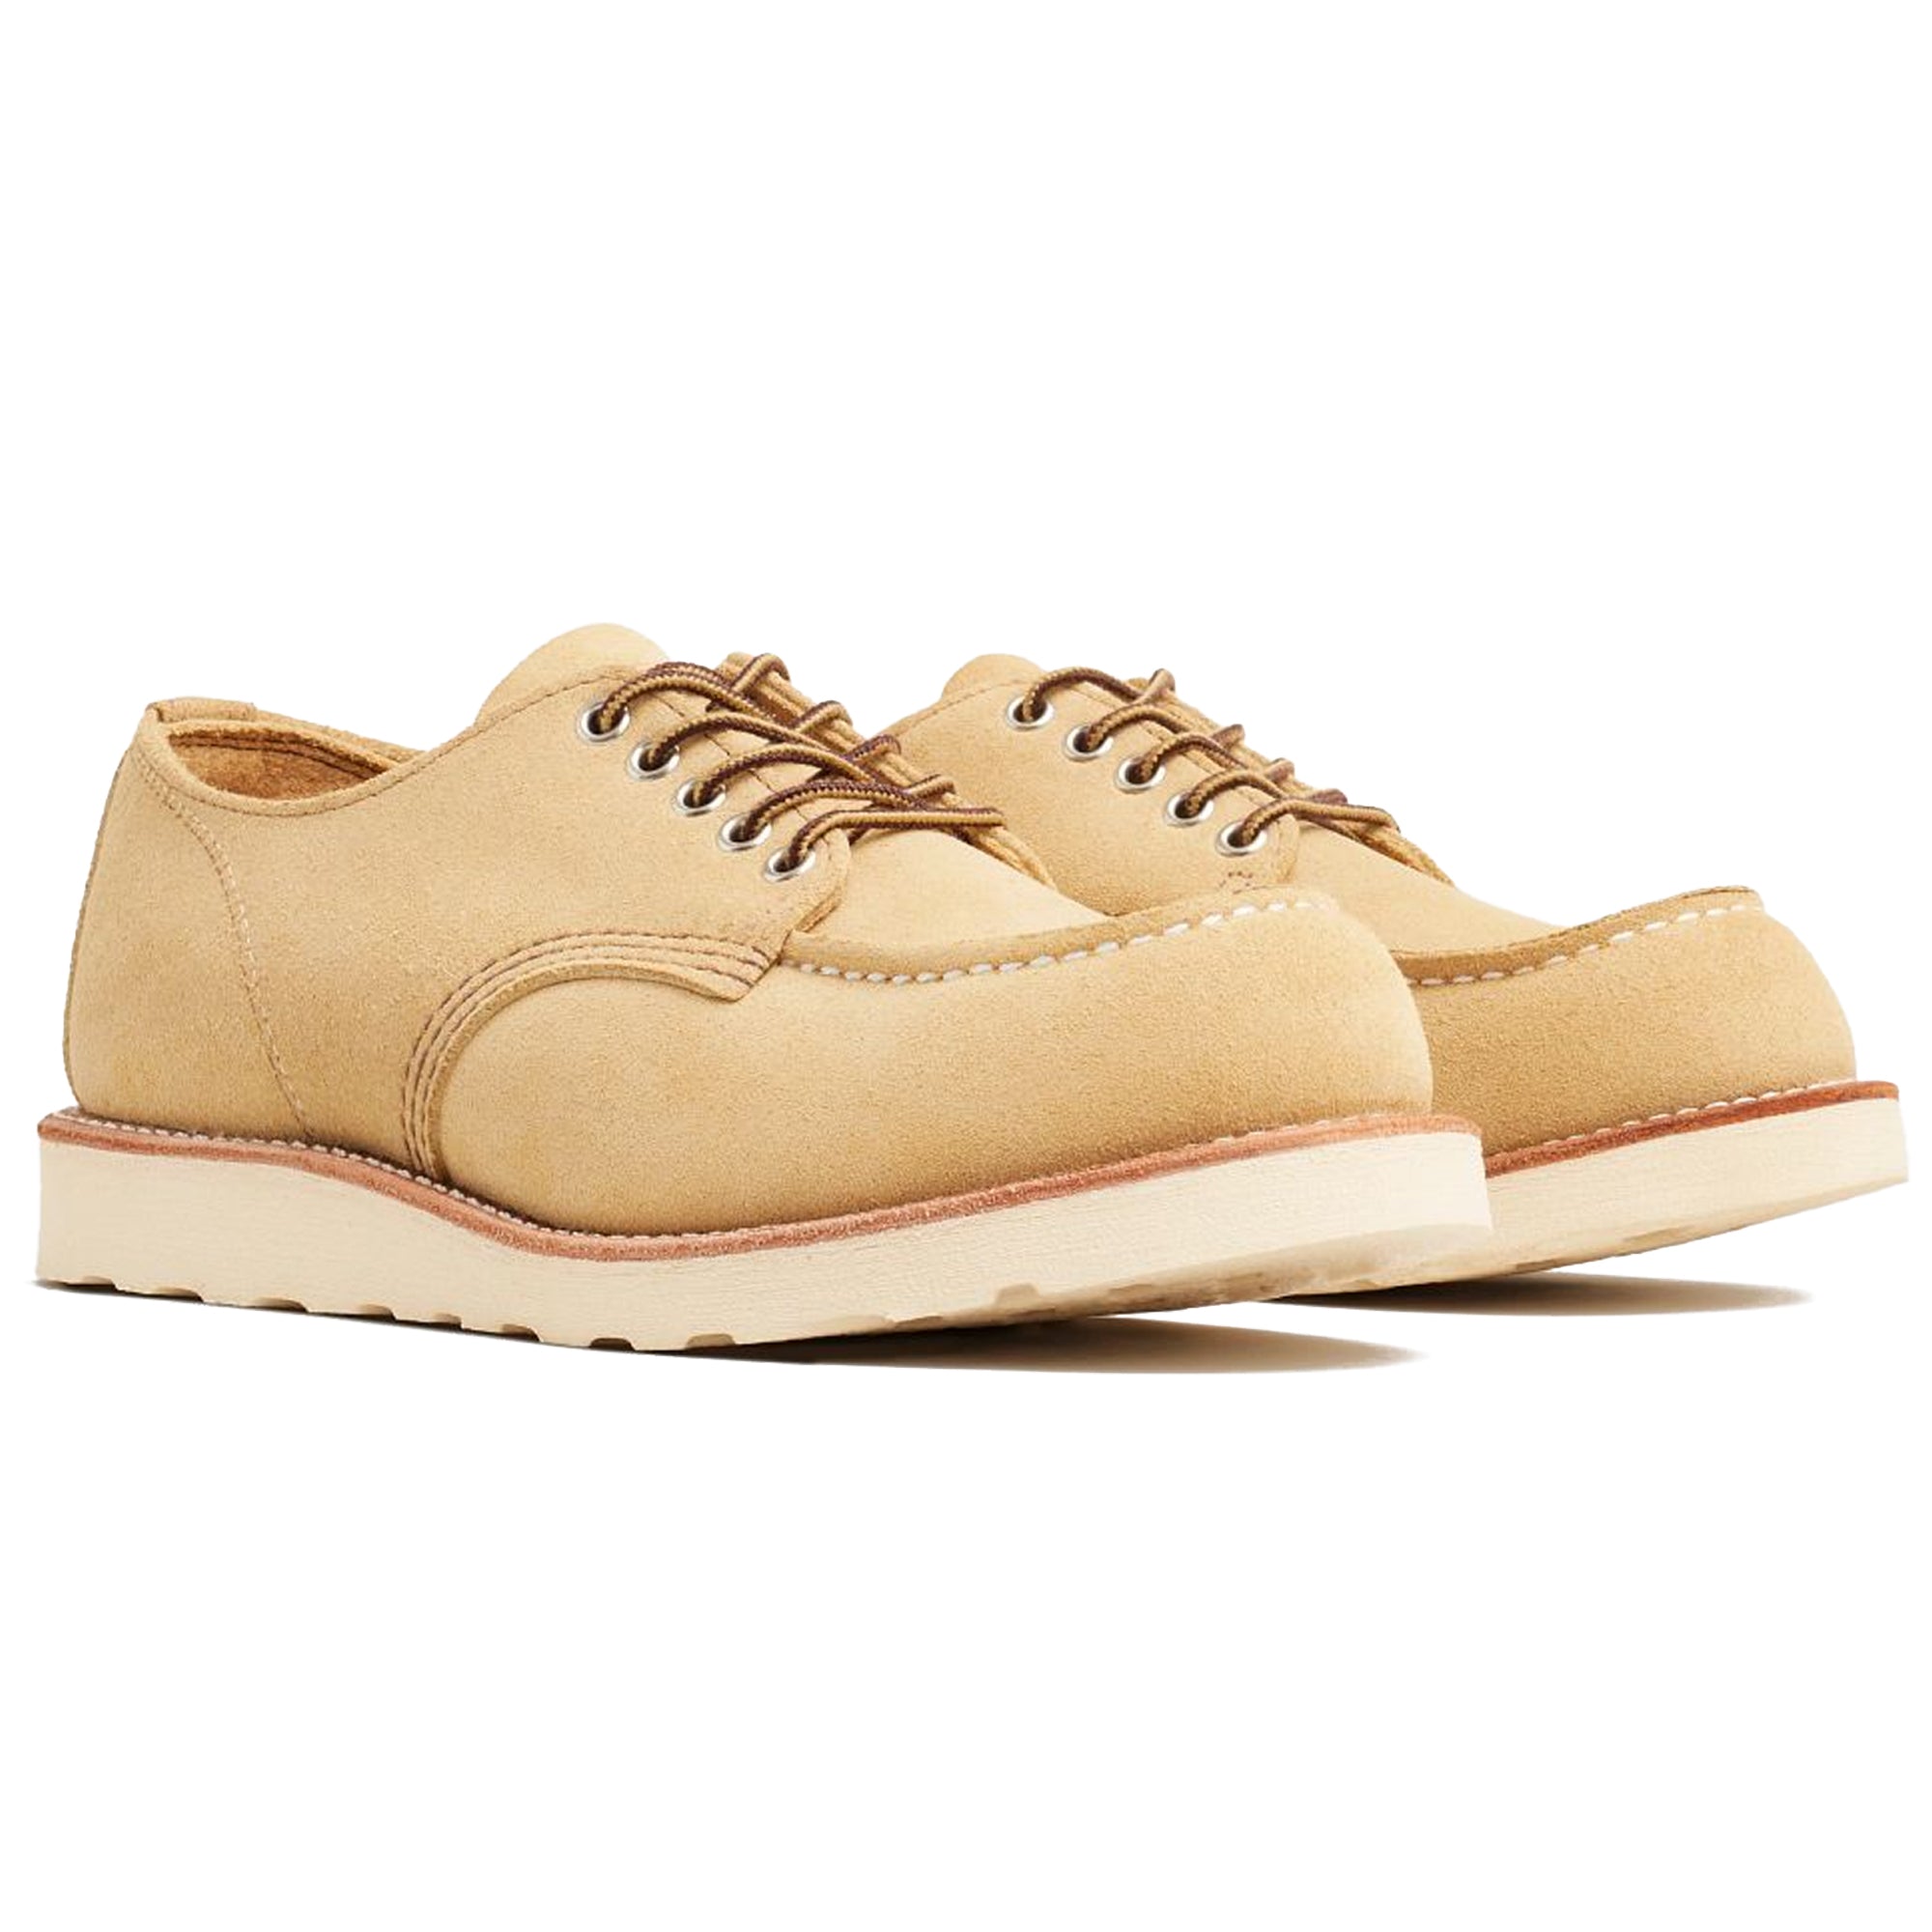 Red Wing 8079 Shop Moc Oxford Shoes – Hawthorne Abilene